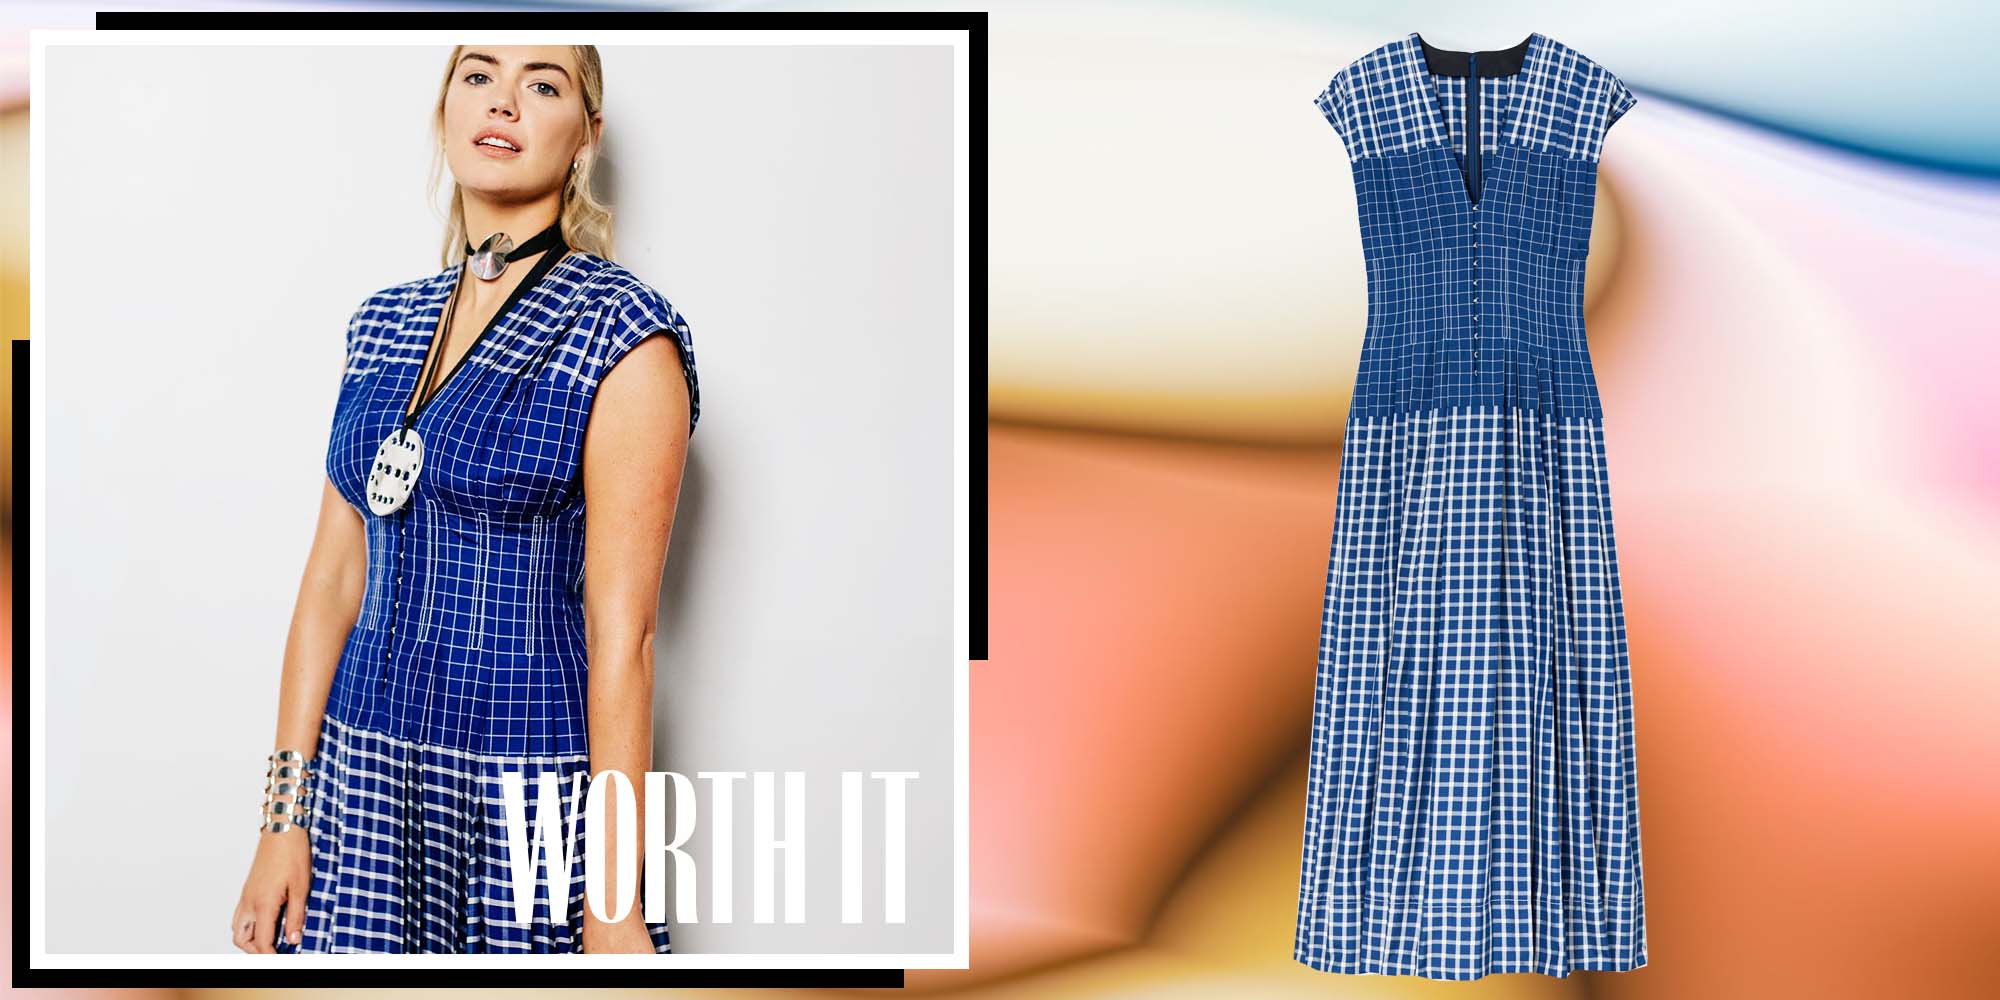 Tory Burch's Claire McCardell Dress Pays Homage to the